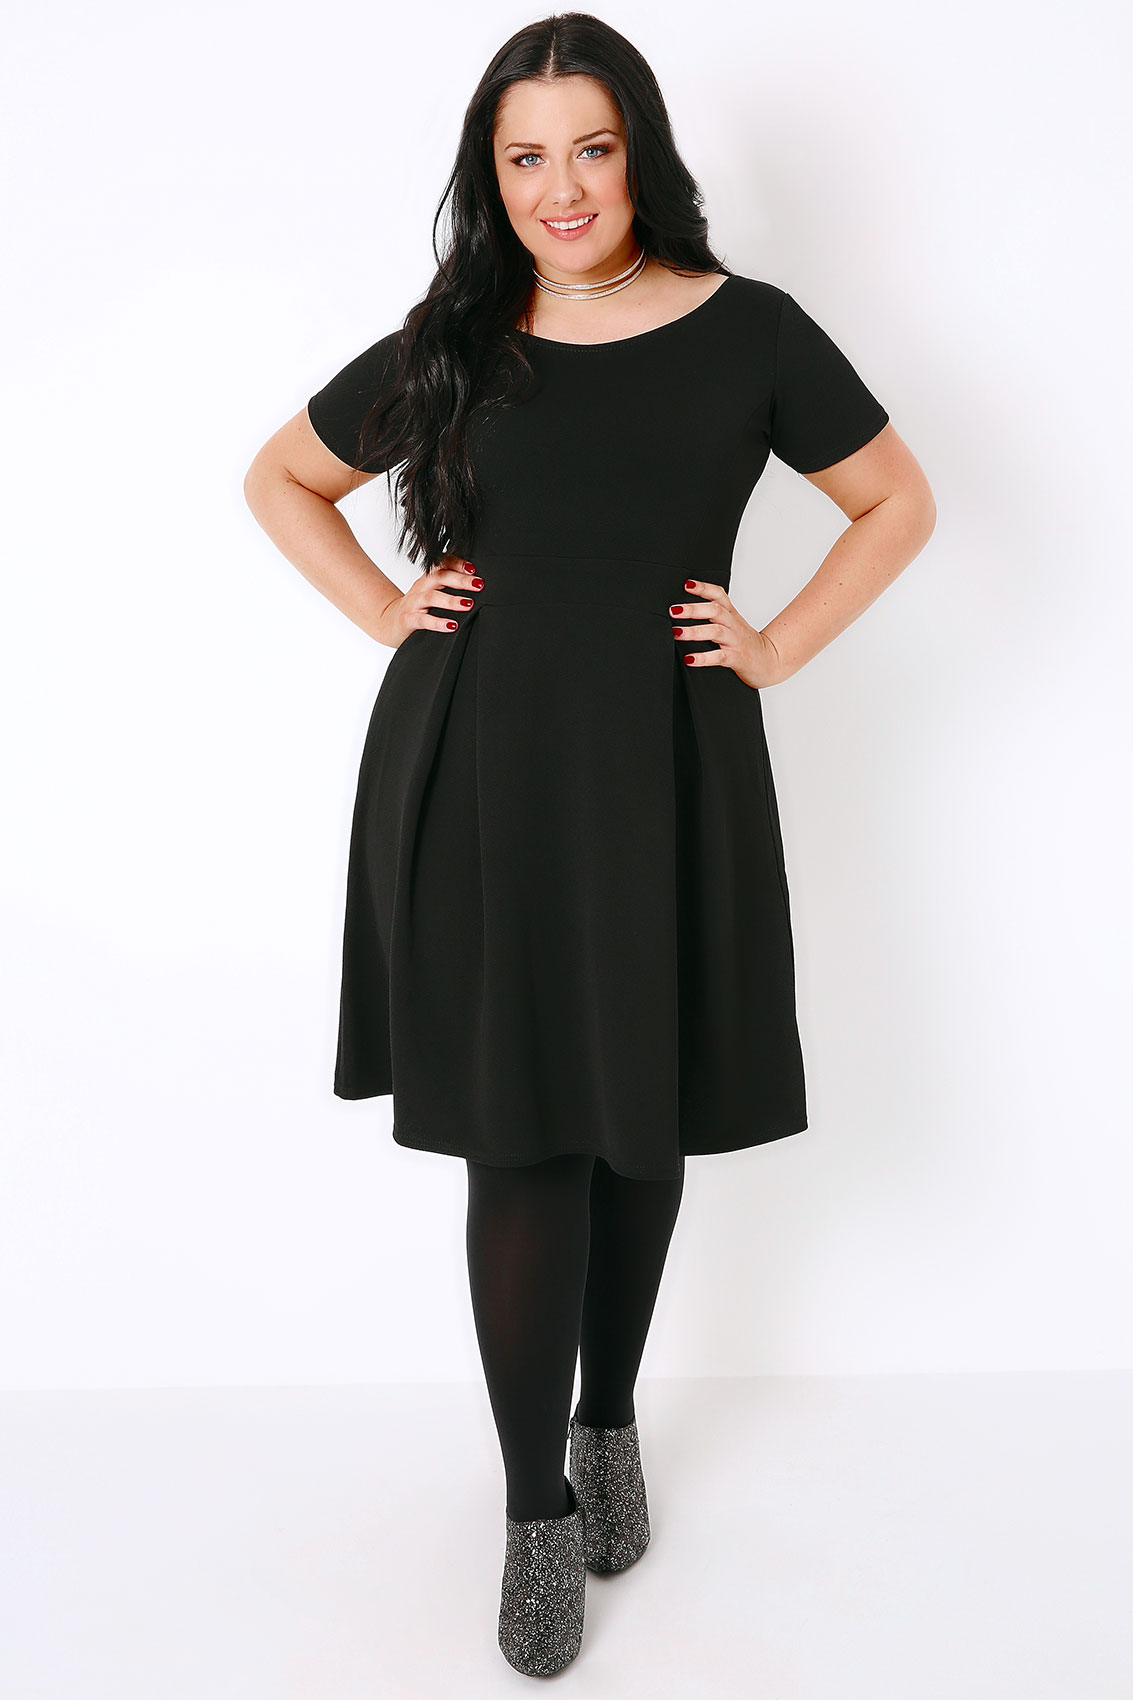 SIENNA COUTURE Black Sleeved Skater Dress, Plus Size 16 to 28